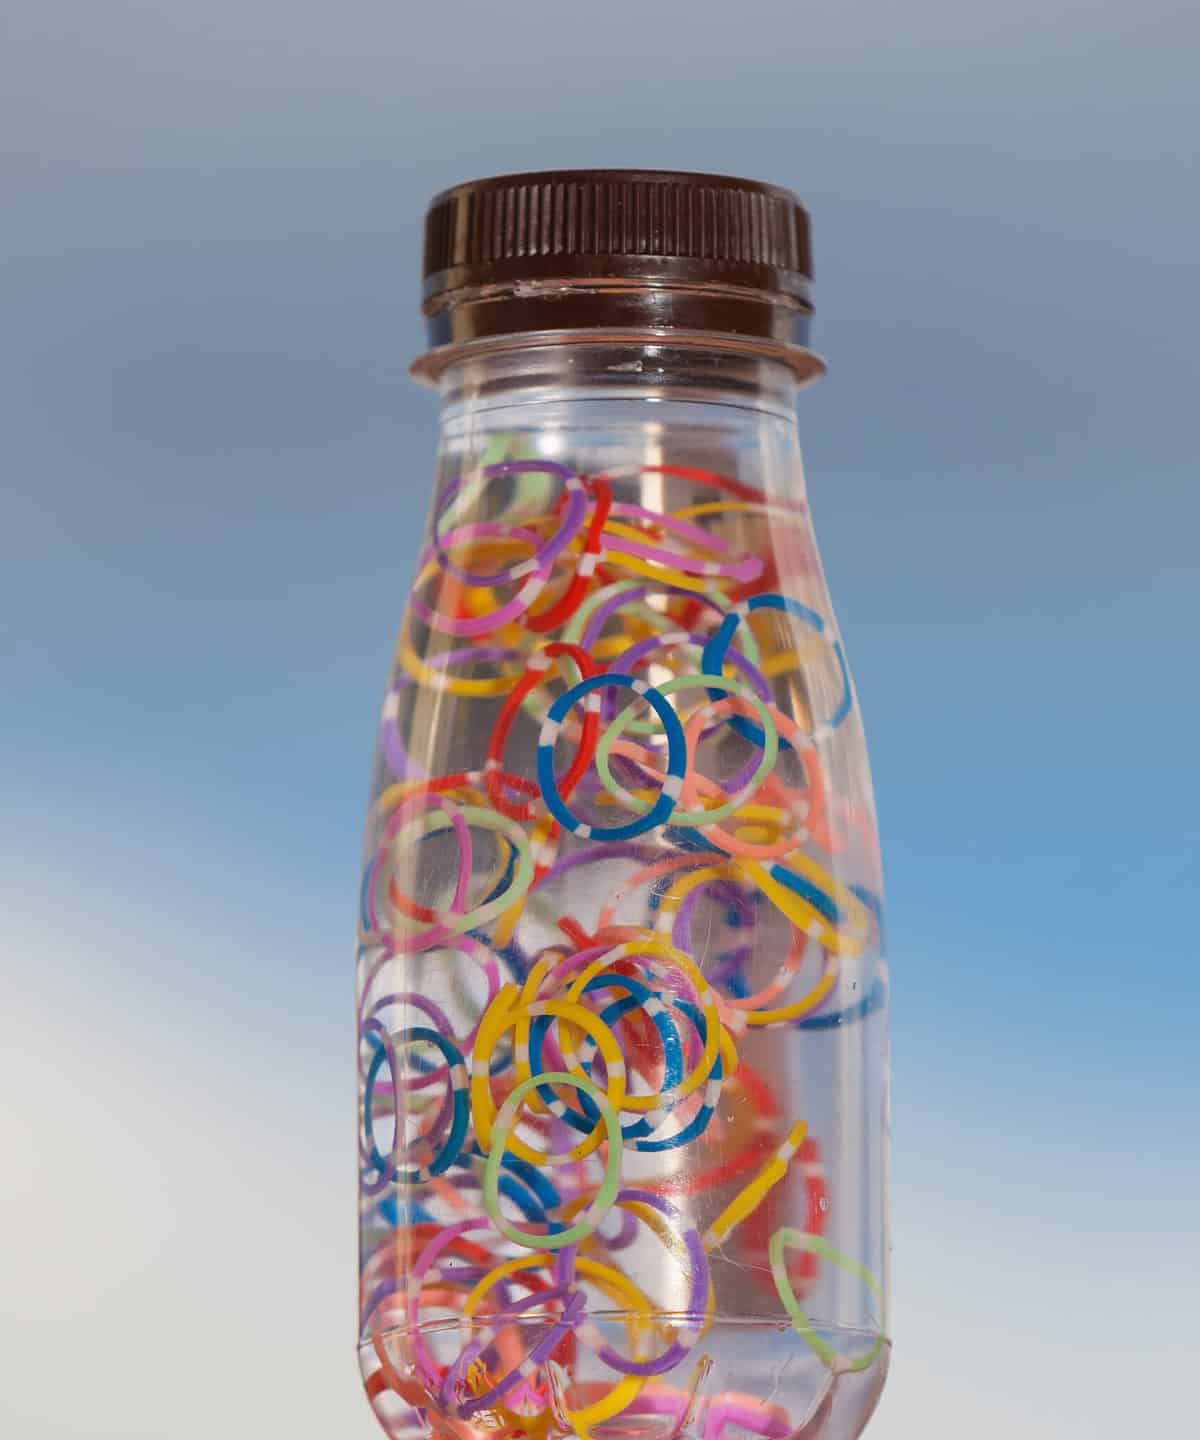 Center frame: a clear glass or plastic bottle with a black plastic top is filled with water and small rubber bands. The rubber bands are green yellow blue red purple and pink. They are all uniform in size. They are small, they type of rubber bands used to create hairstyles with very many braids. The bottle is on a piece of wood. The background is gradient blue.